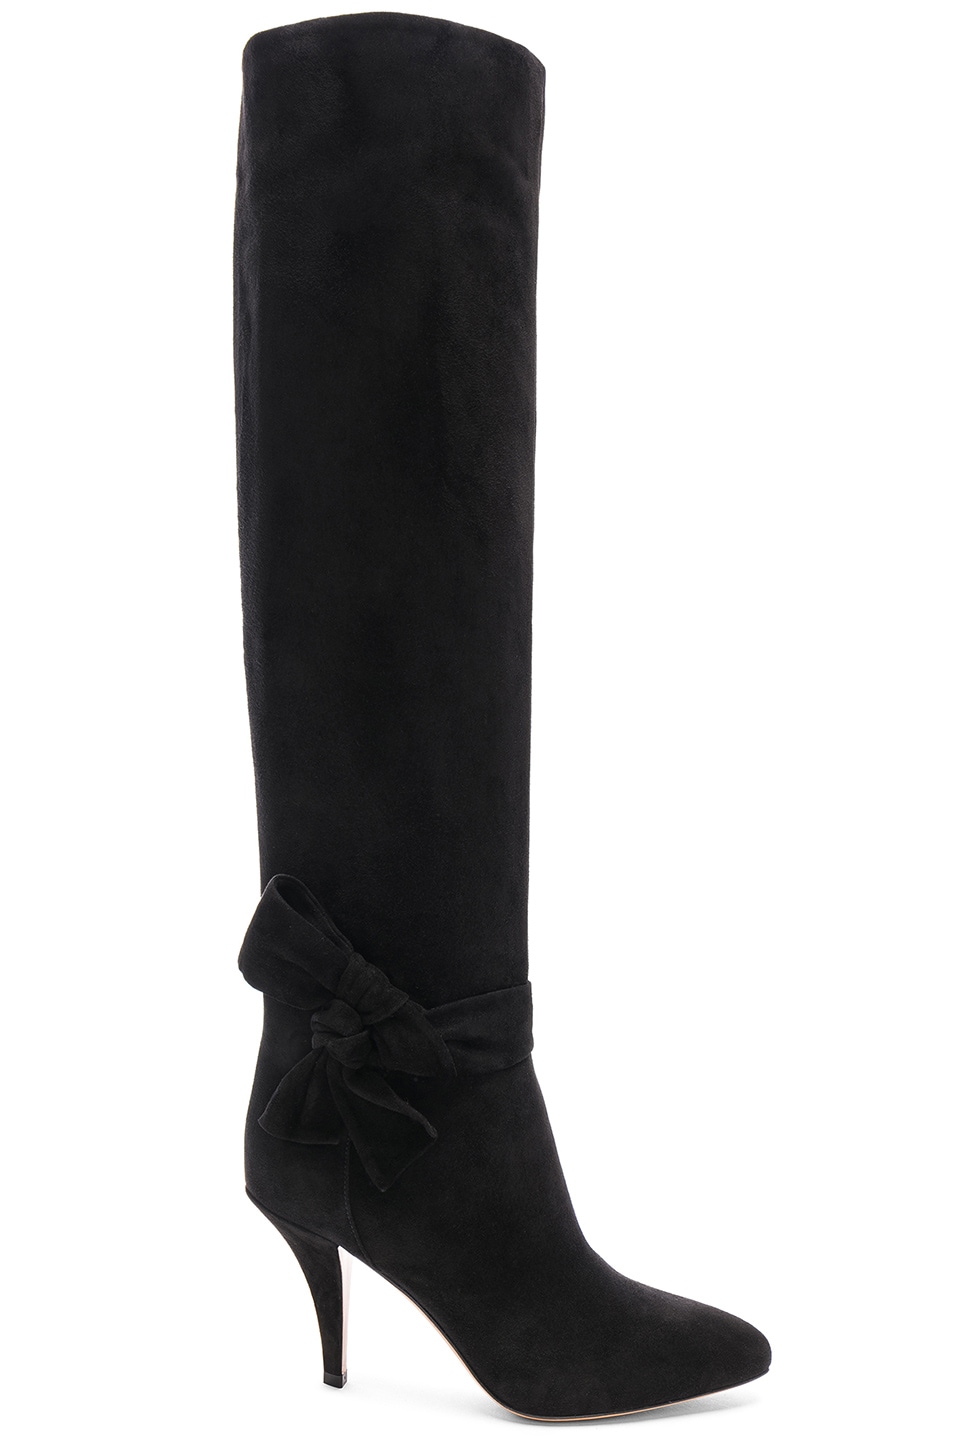 Image 1 of Valentino Garavani Suede Bow Knee High Boots in Black